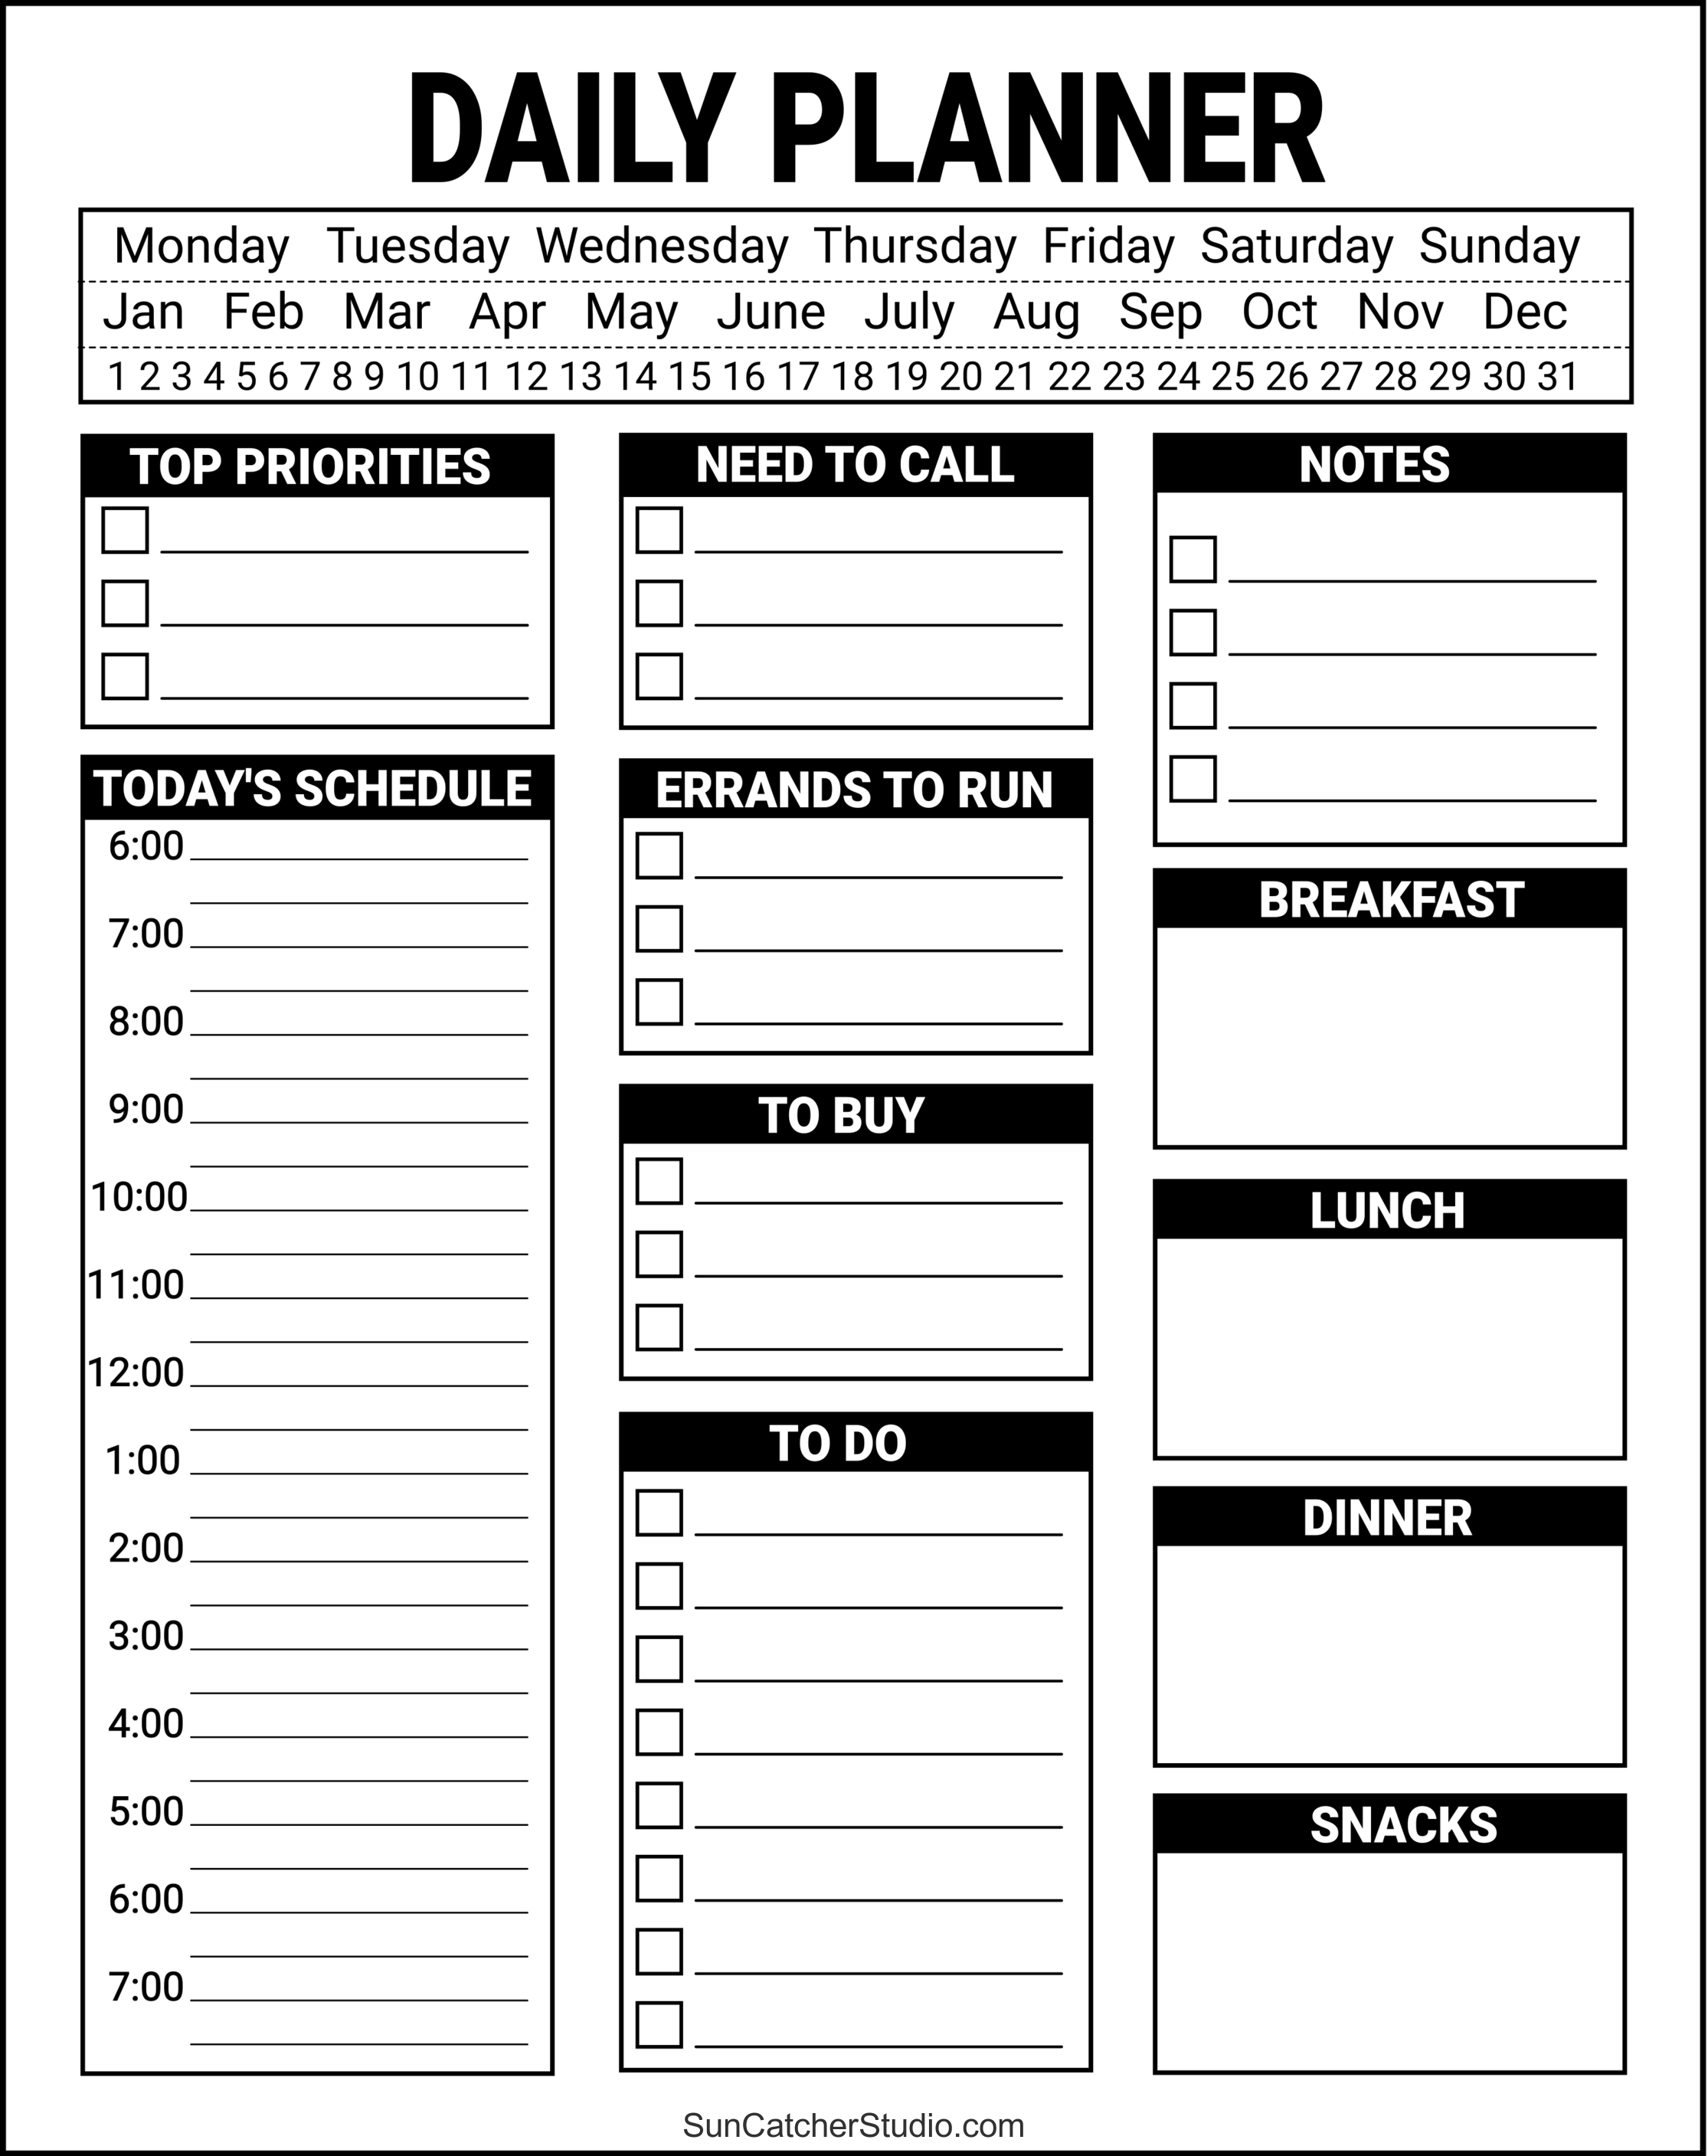 Free Printable Daily Planner Templates PDF Format DIY Projects Patterns Monograms Designs Templates